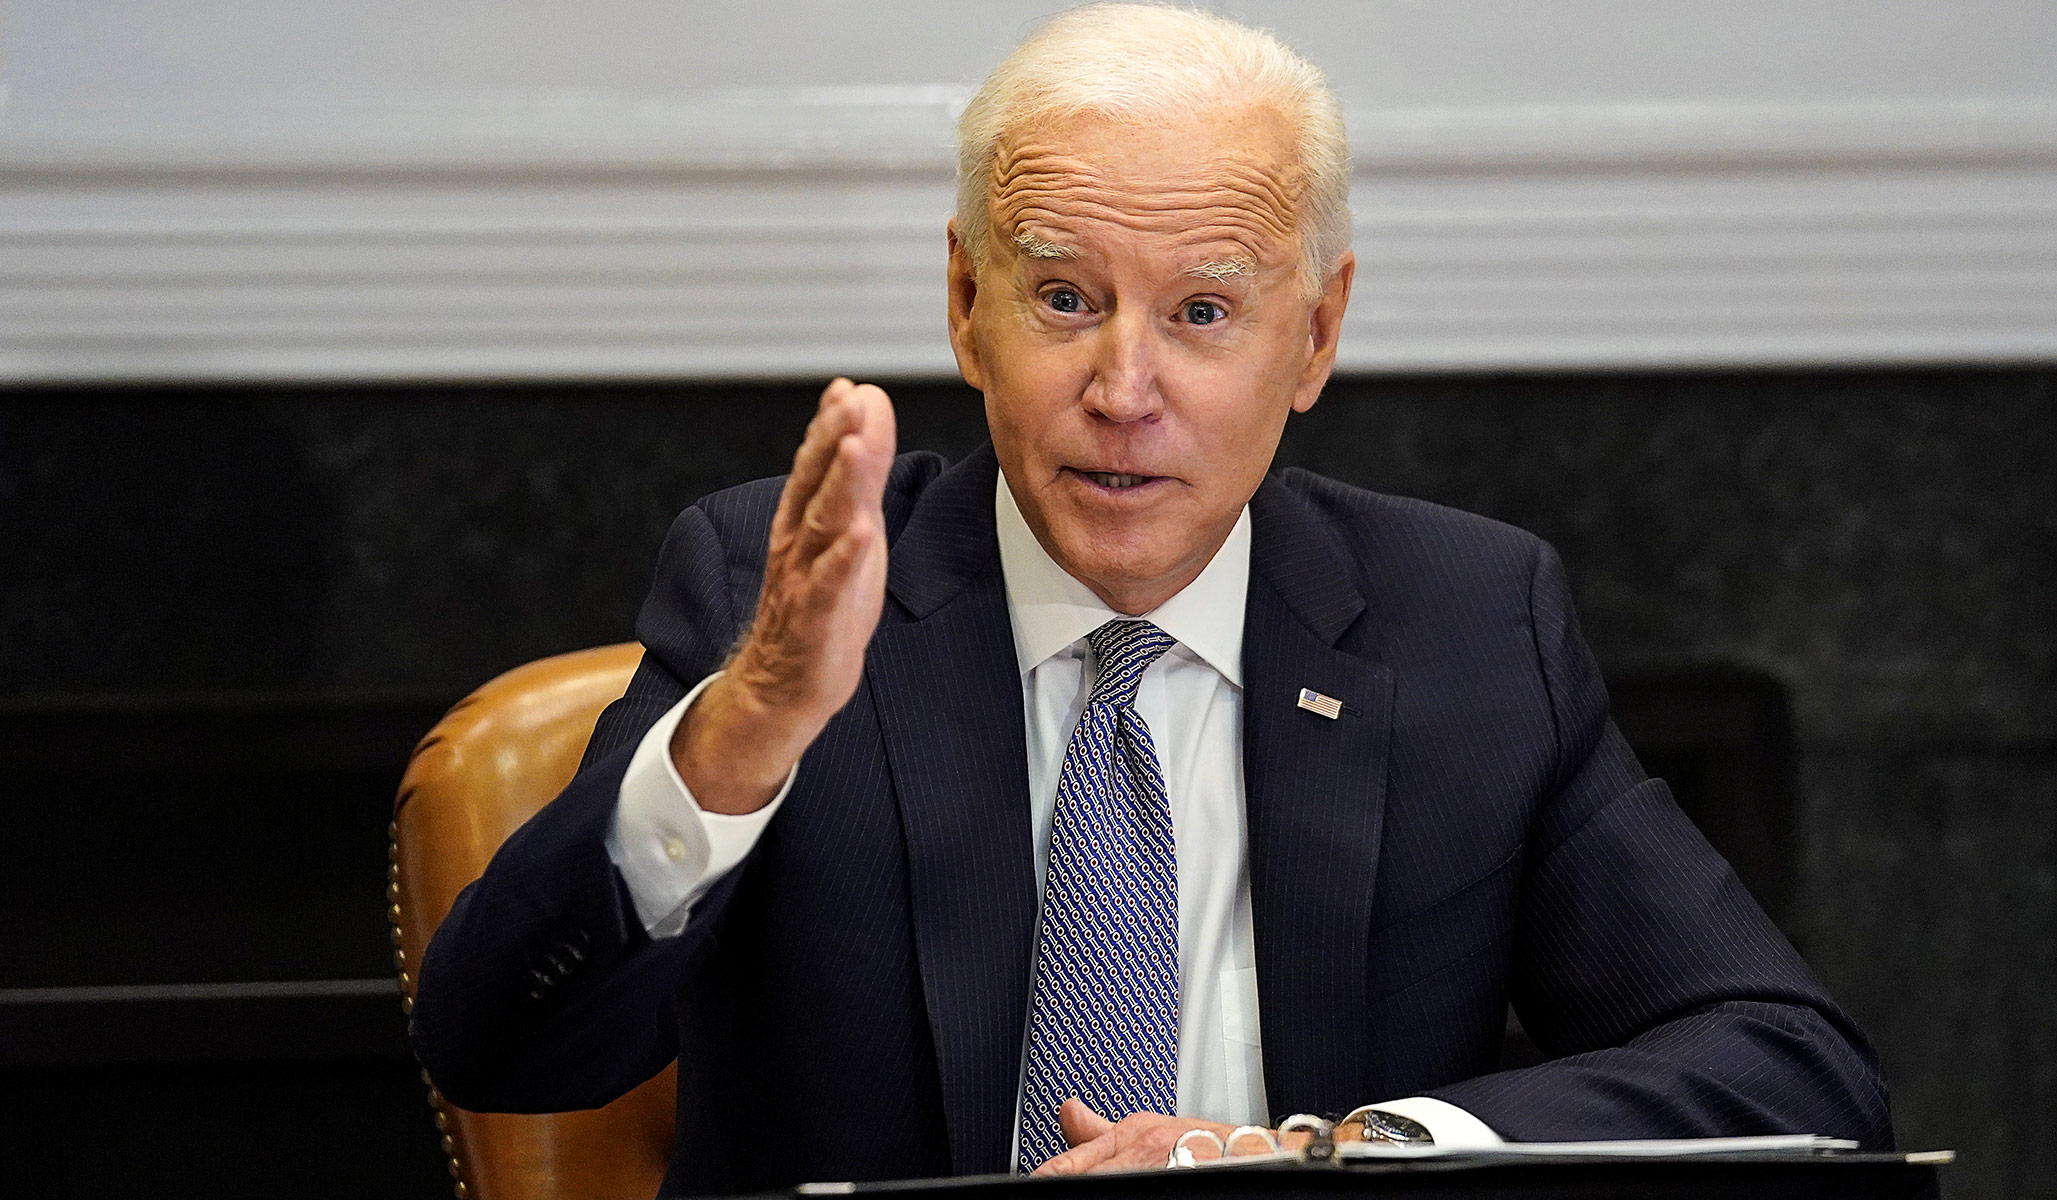 The Biden-Harris administration appeals goes to court for a transgender mandate for doctors and hospitals.